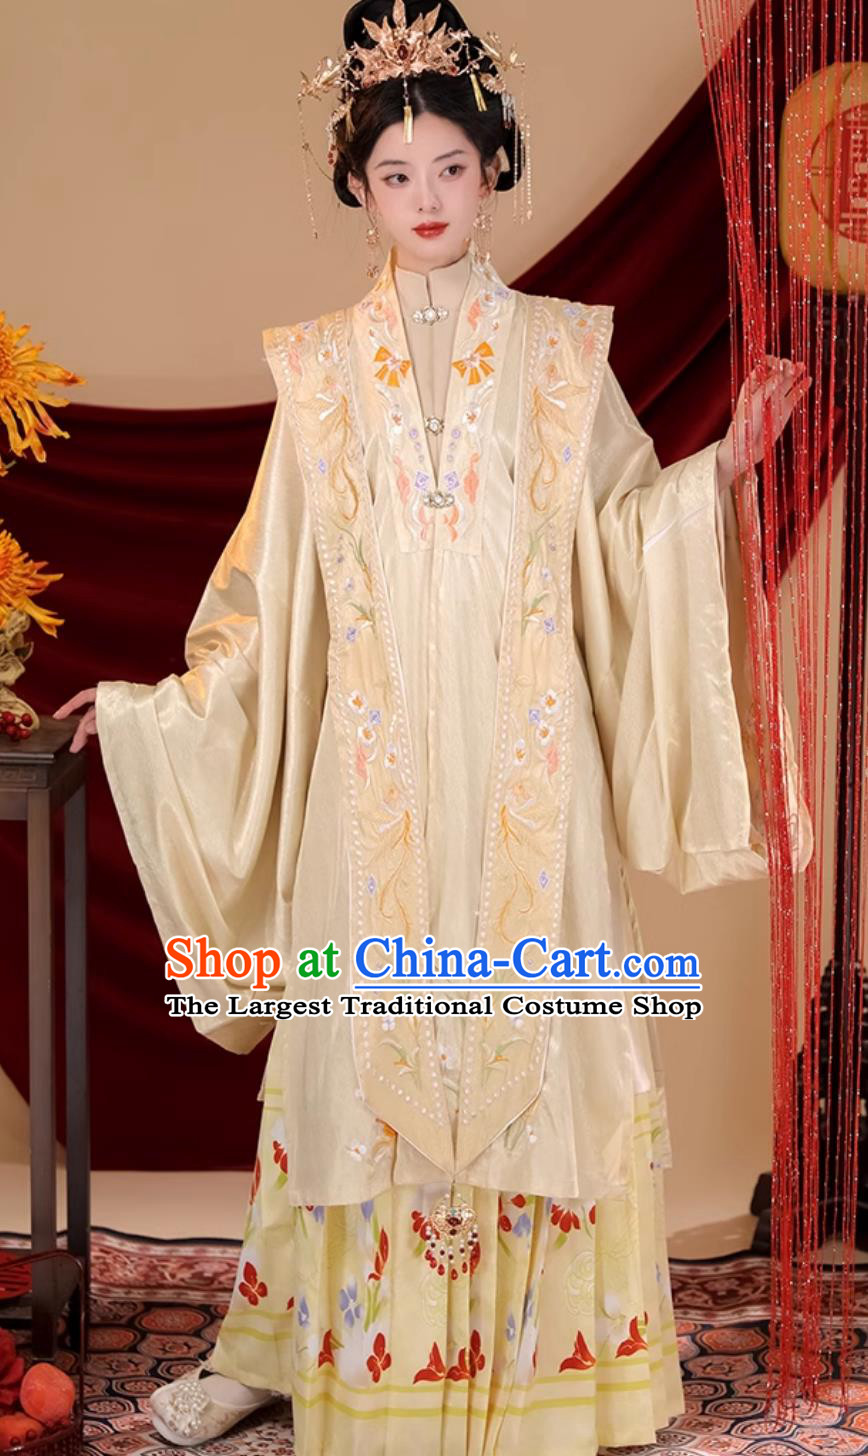 Chinese,qipao,Chinese,jackets,Chinese,handbags,Chinese,wallets,Search,Buy,Purchase,for,You,Online,Shopping